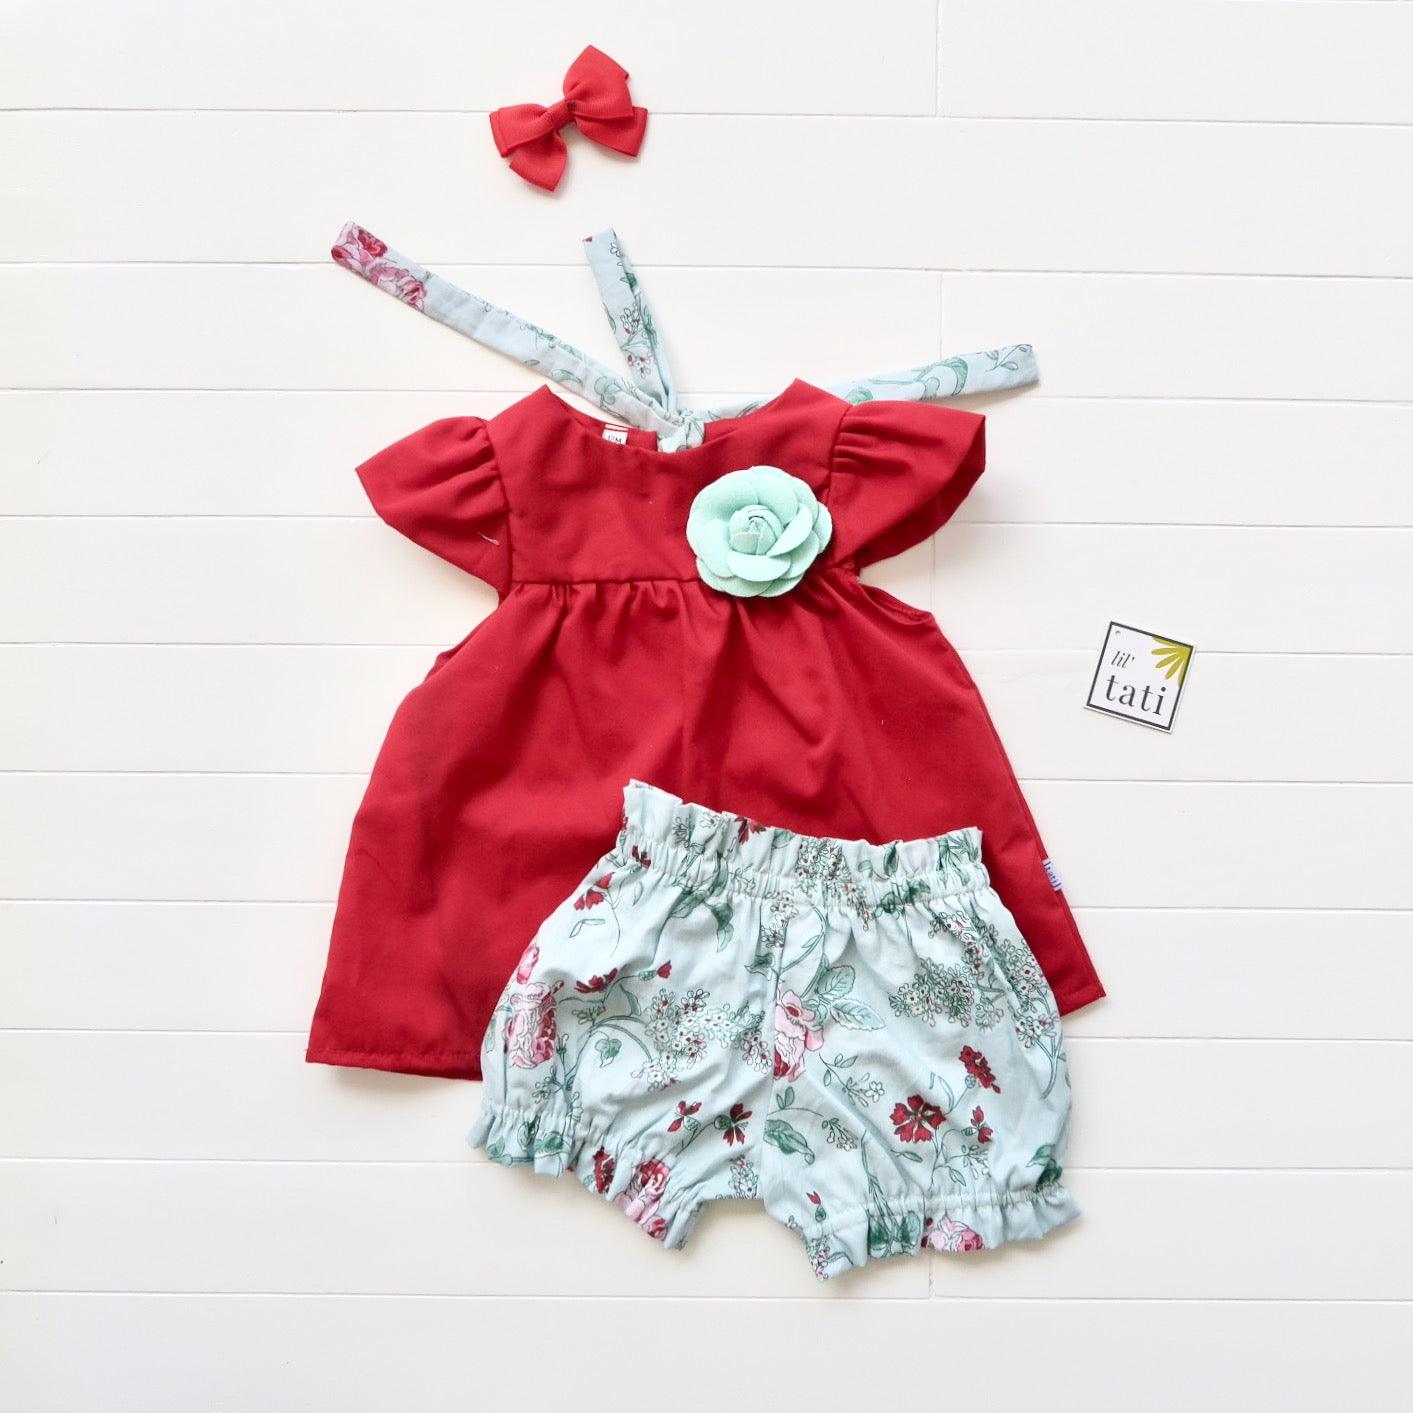 Roza Top & Shorts in Red Cotton and Mint Floral - Lil' Tati